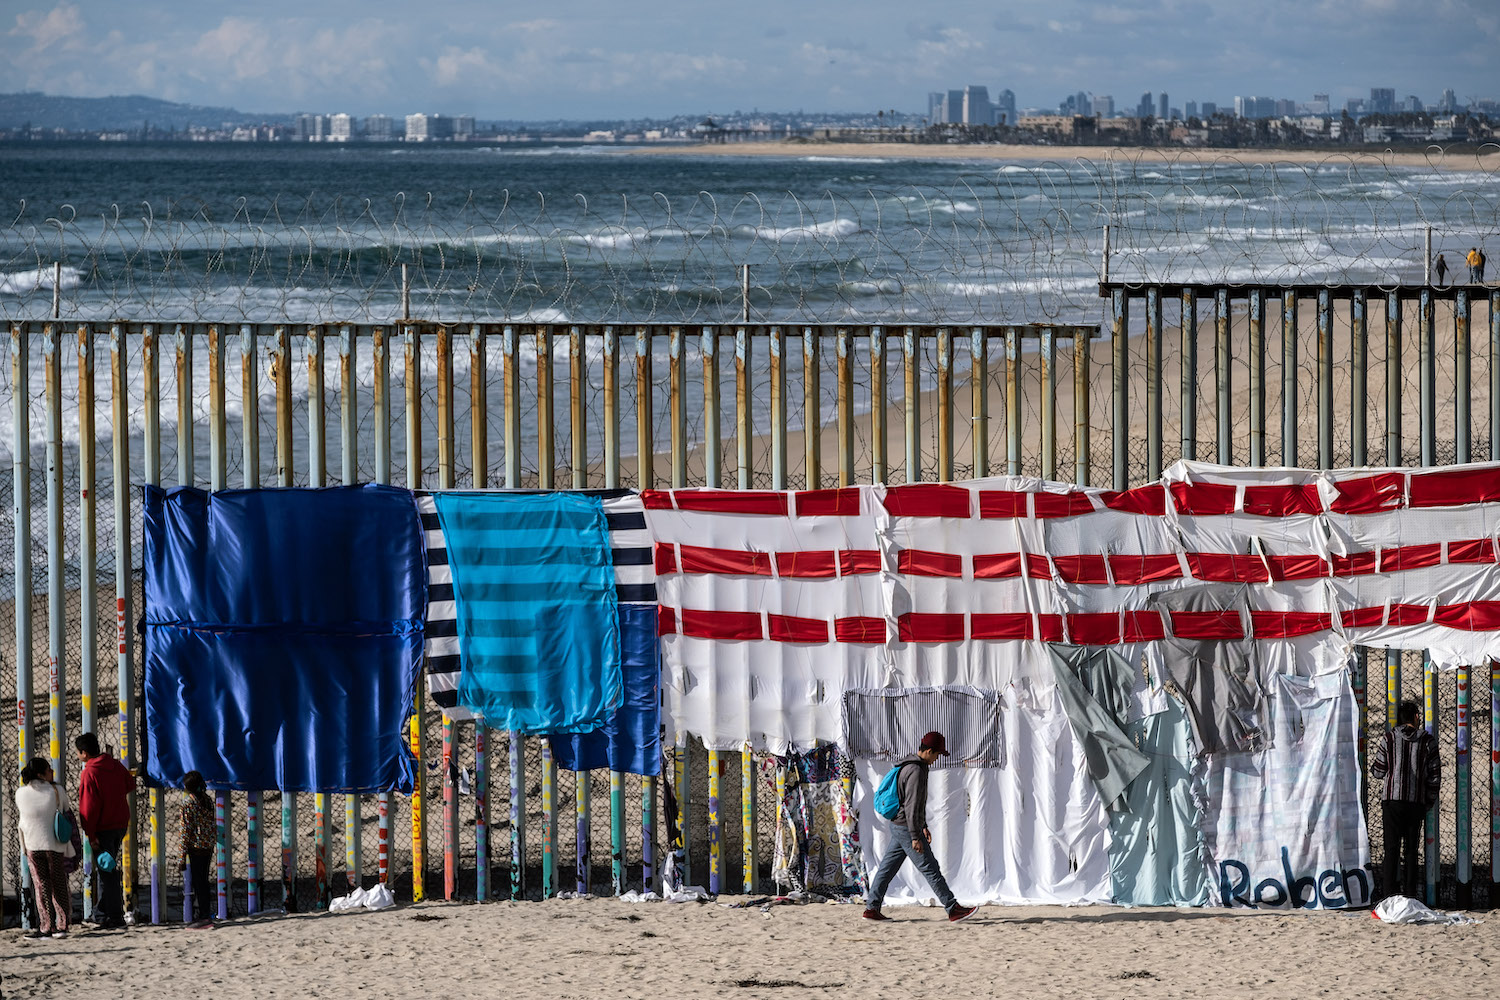 A collection of cloths representing the U.S. flag on a portion of the U.S.-Mexico border wall.